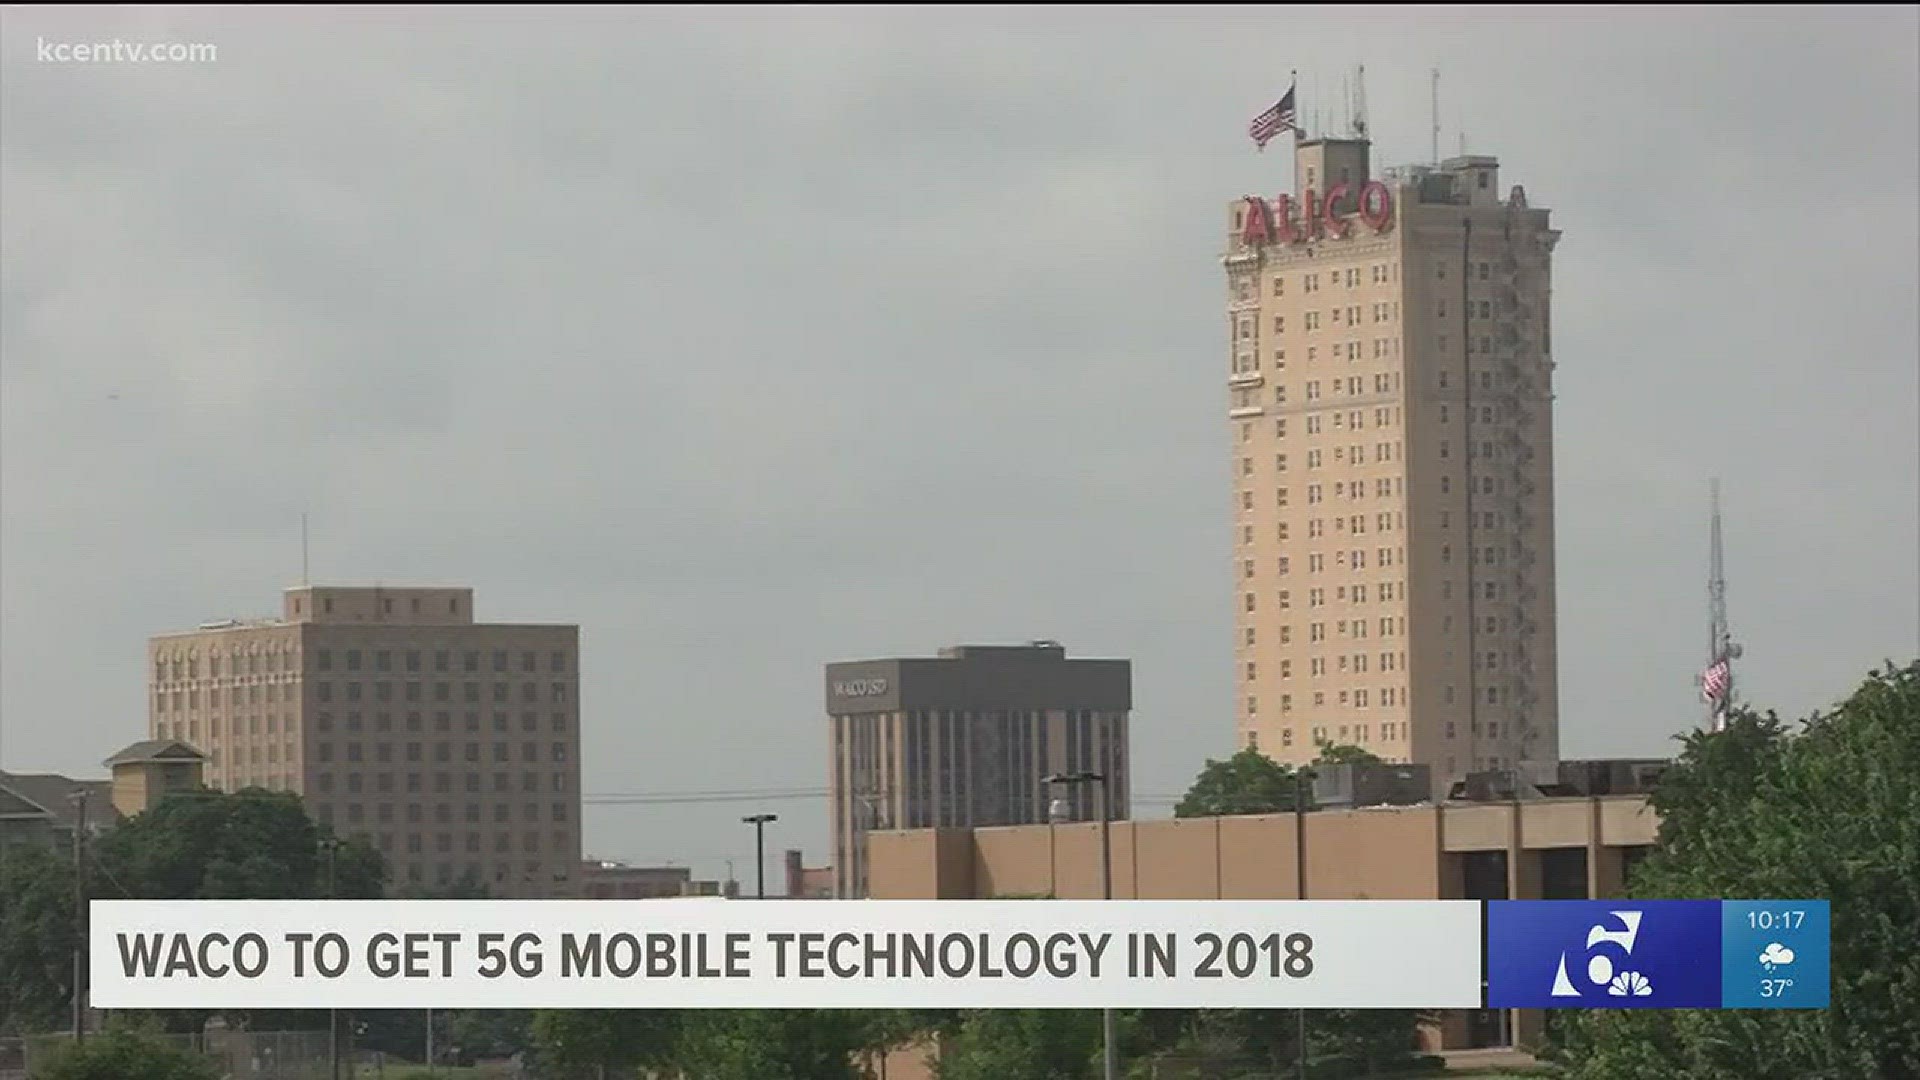 Wacoans will be among the first in the country to experience 5G mobile technology.